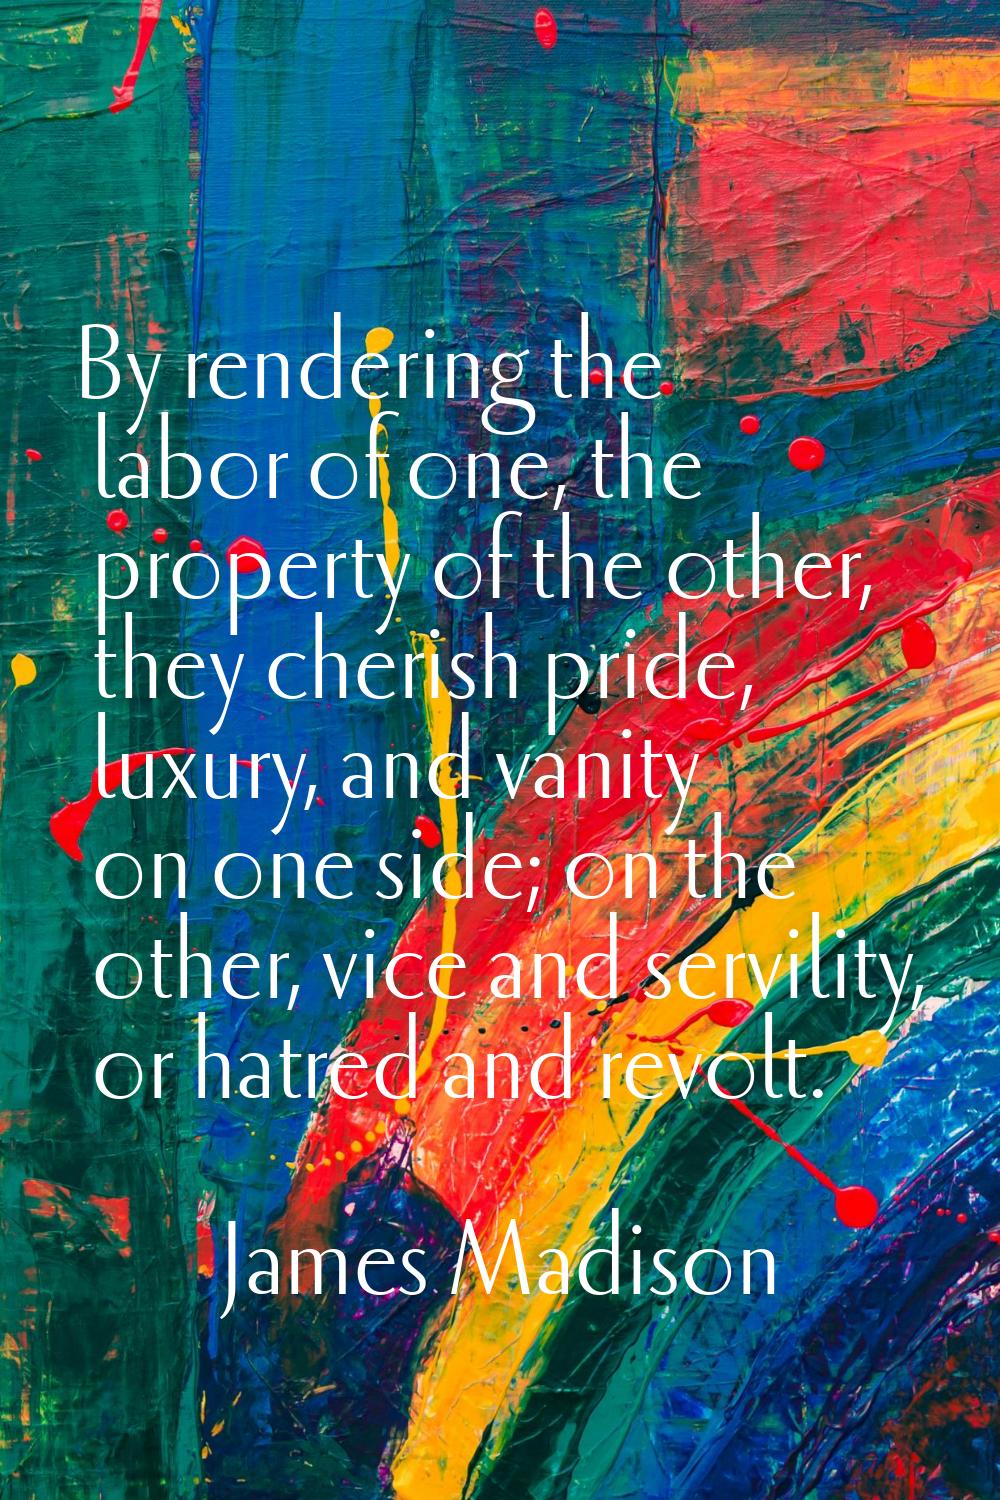 By rendering the labor of one, the property of the other, they cherish pride, luxury, and vanity on